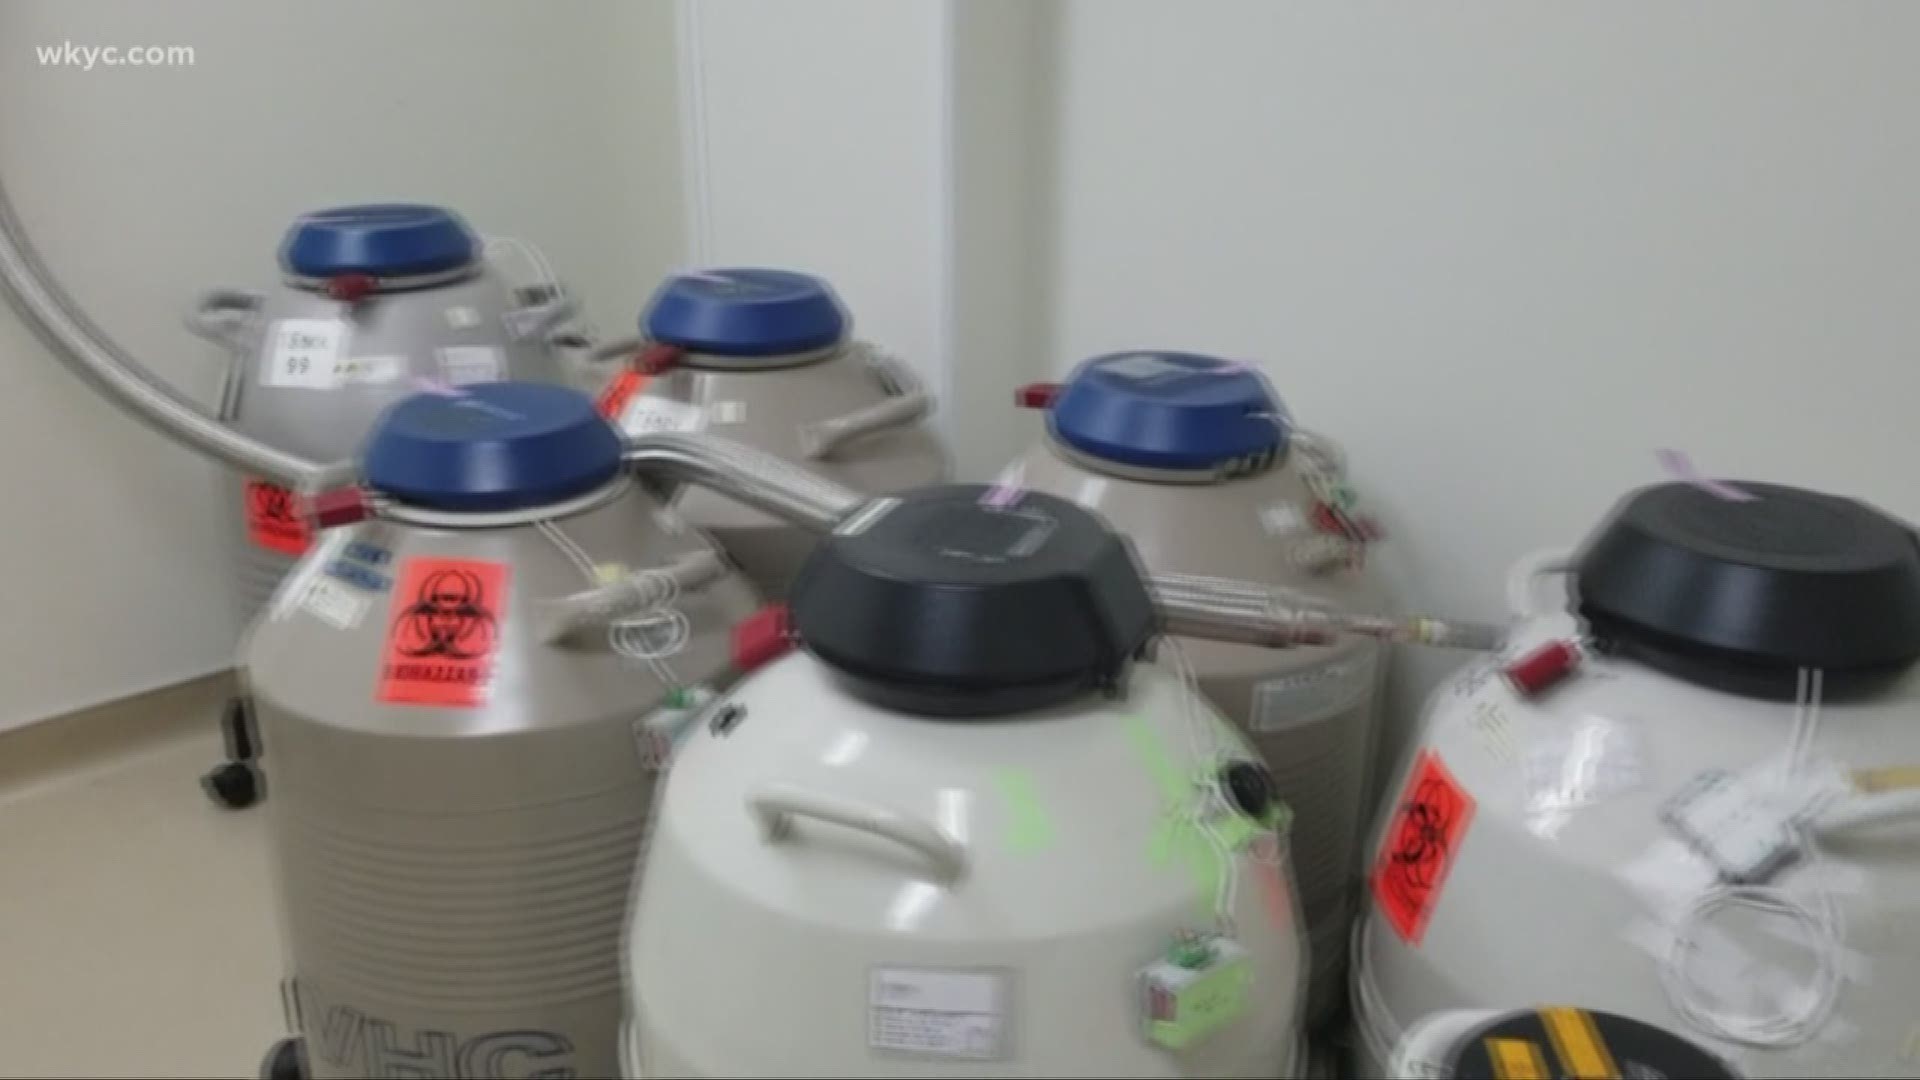 New system devised for fertility clinic storage tanks